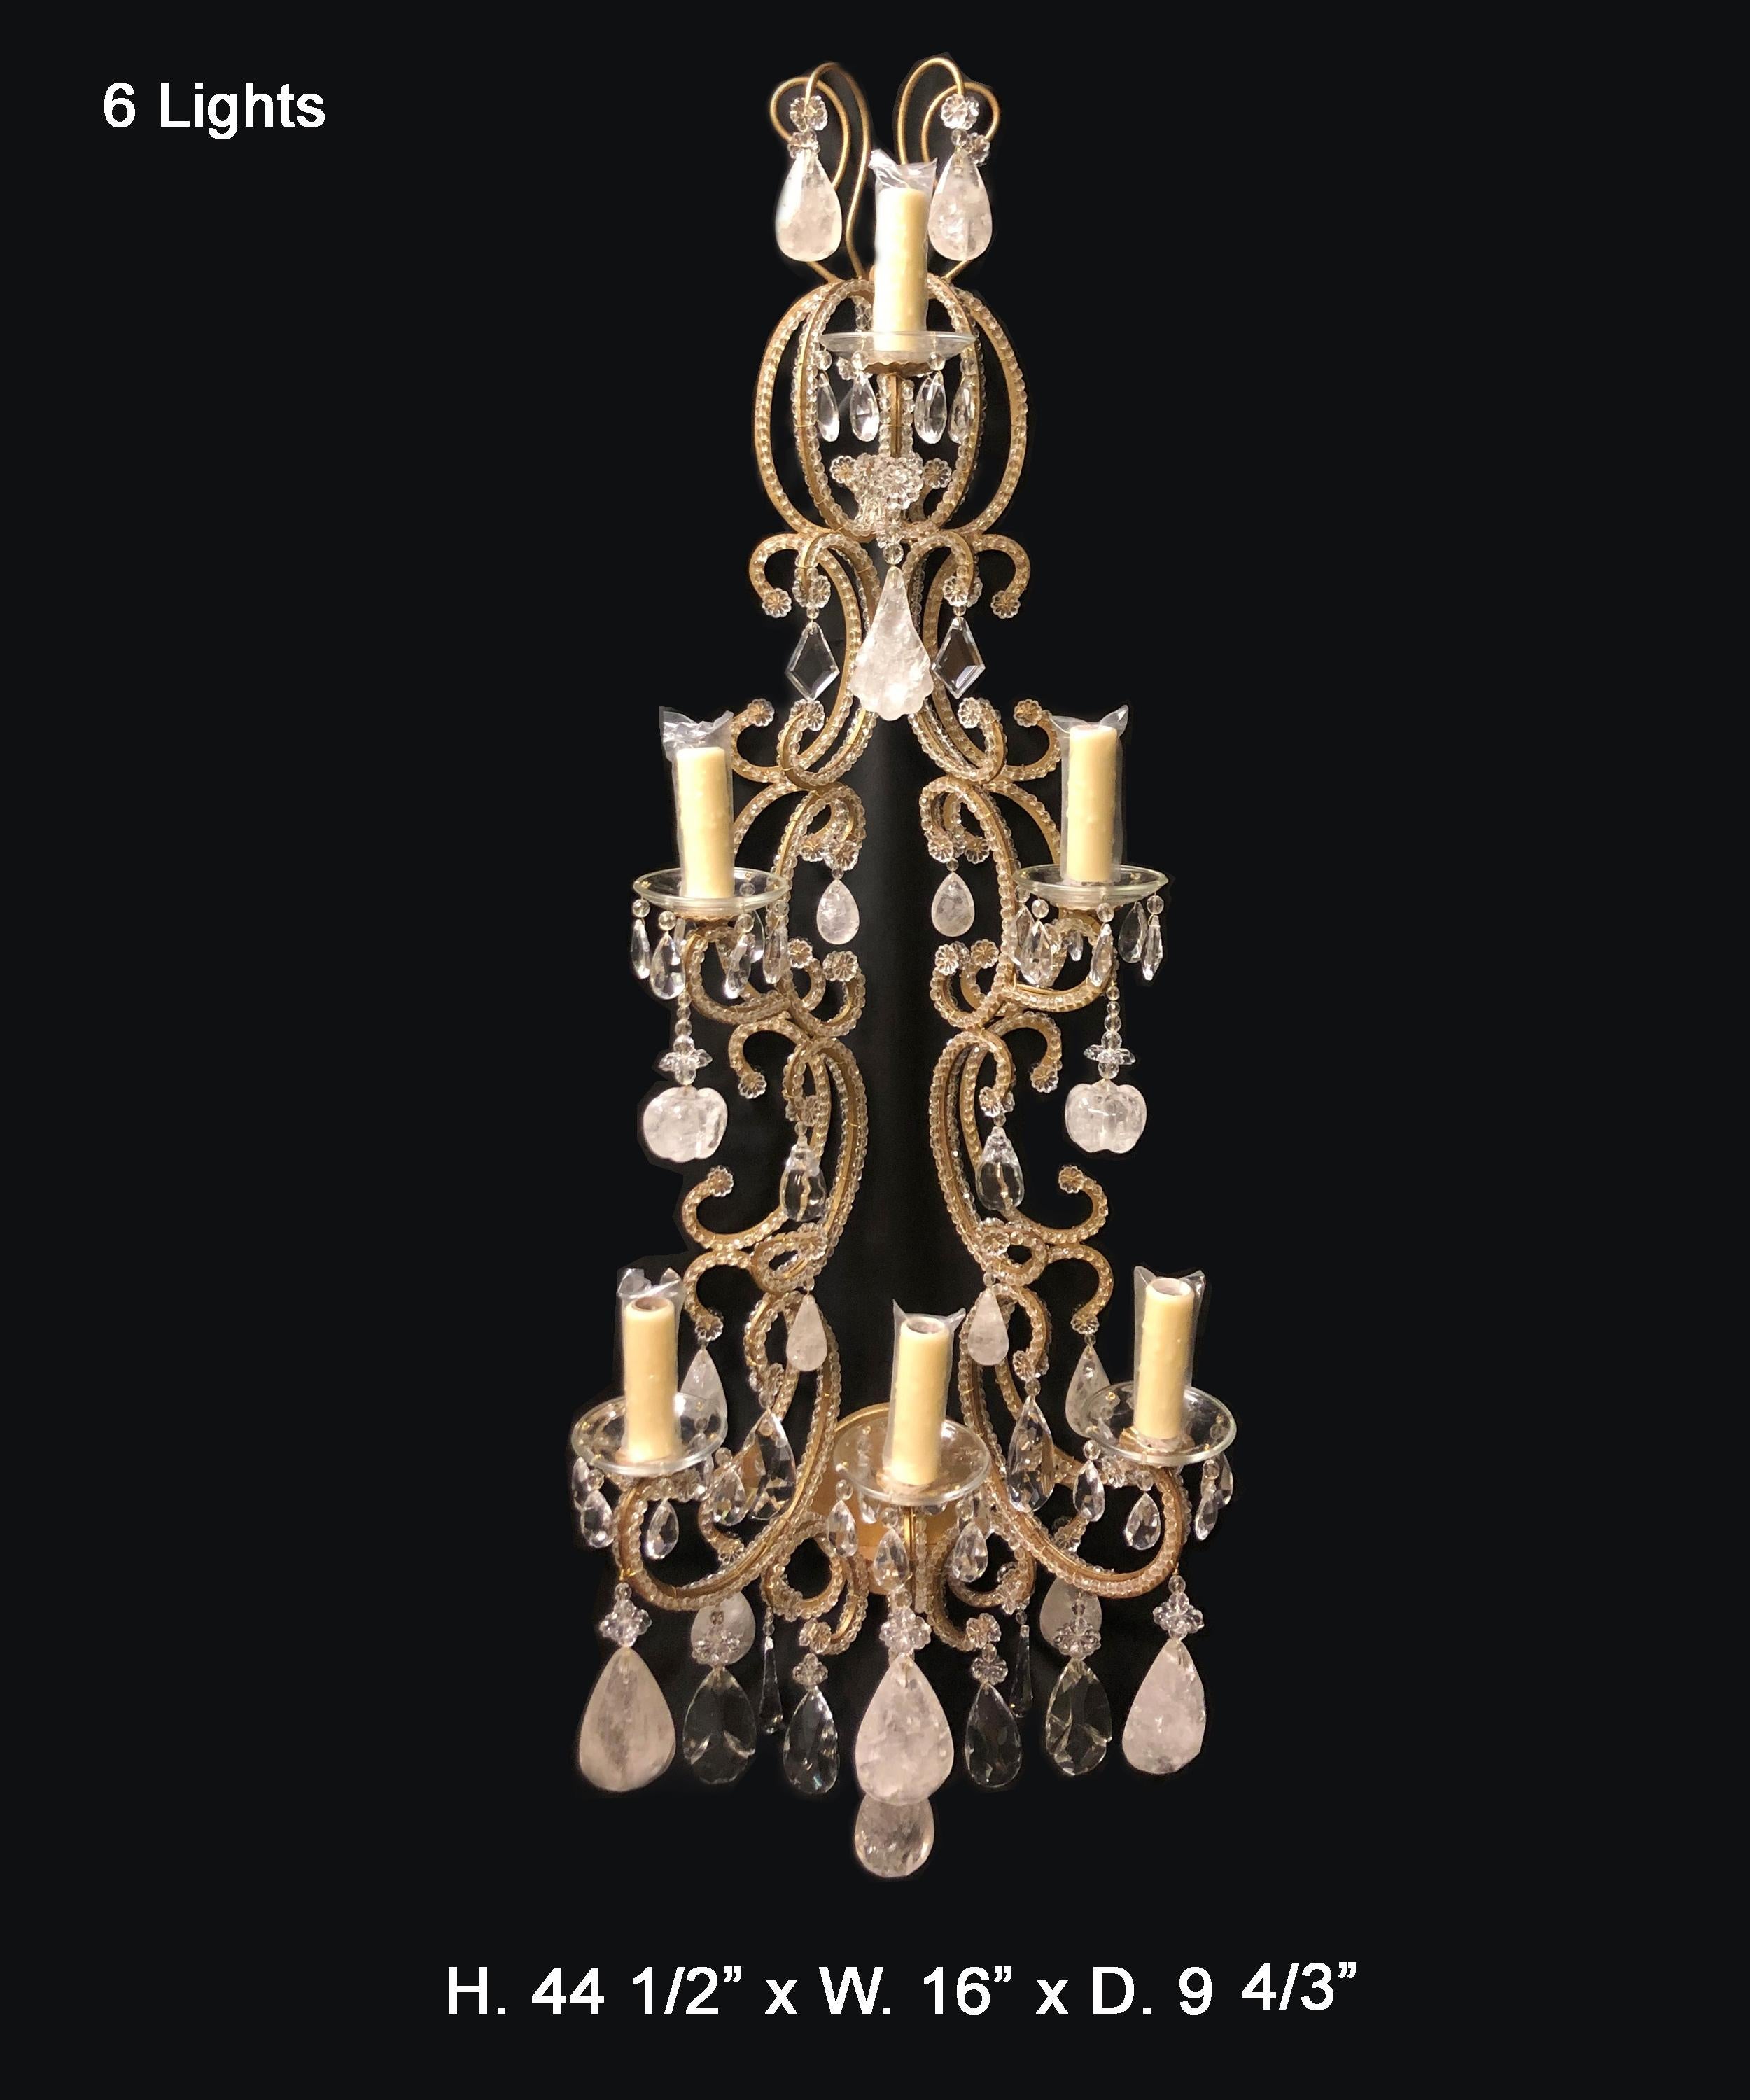 Gorgeous and large pair of Venetian style rock crystal and lead crystal six light sconce. Antique gold finish.
The sconce is beaded with faceted lead crystal beads and rosettes throughout, issuing six scrolling arms with an electrified candleholder